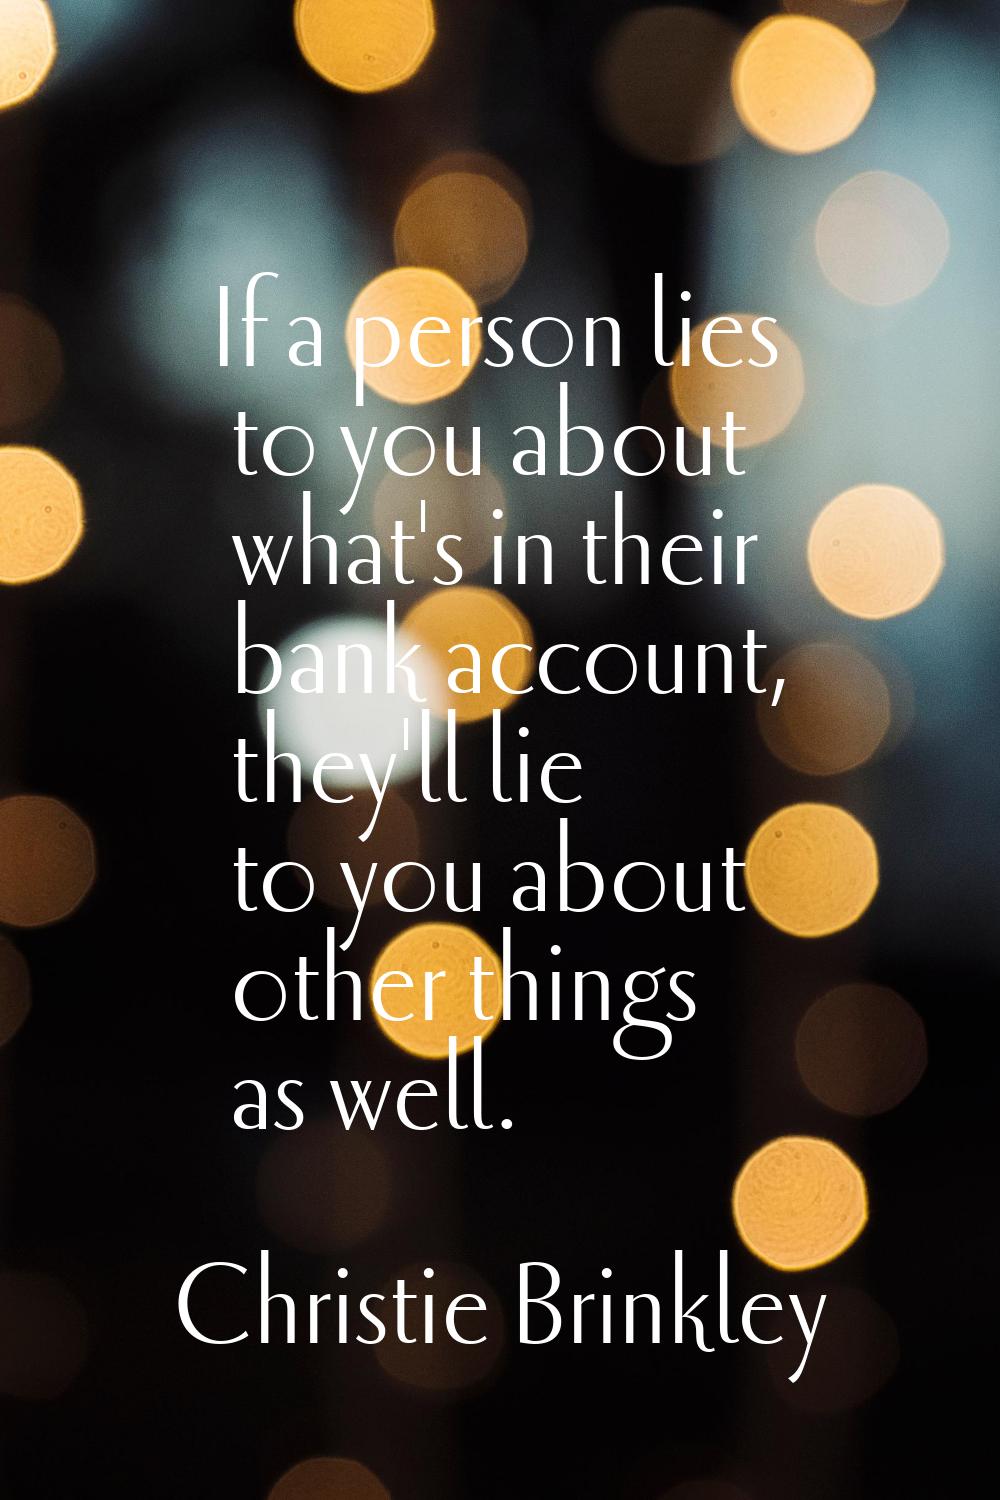 If a person lies to you about what's in their bank account, they'll lie to you about other things a